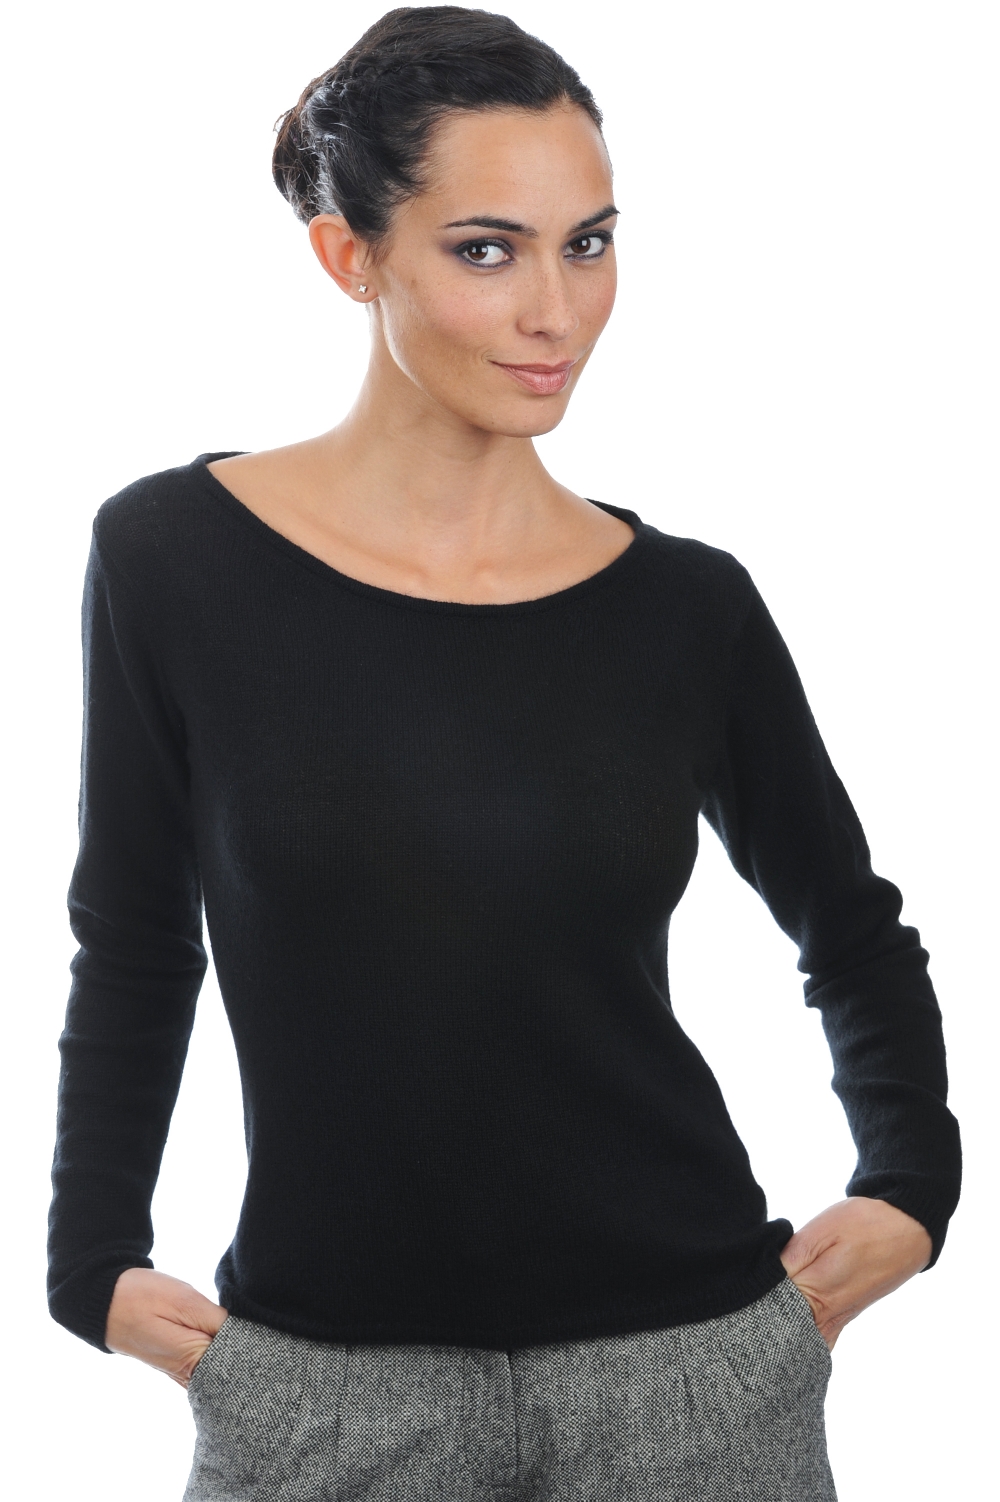 Cashmere ladies basic sweaters at low prices caleen black 4xl